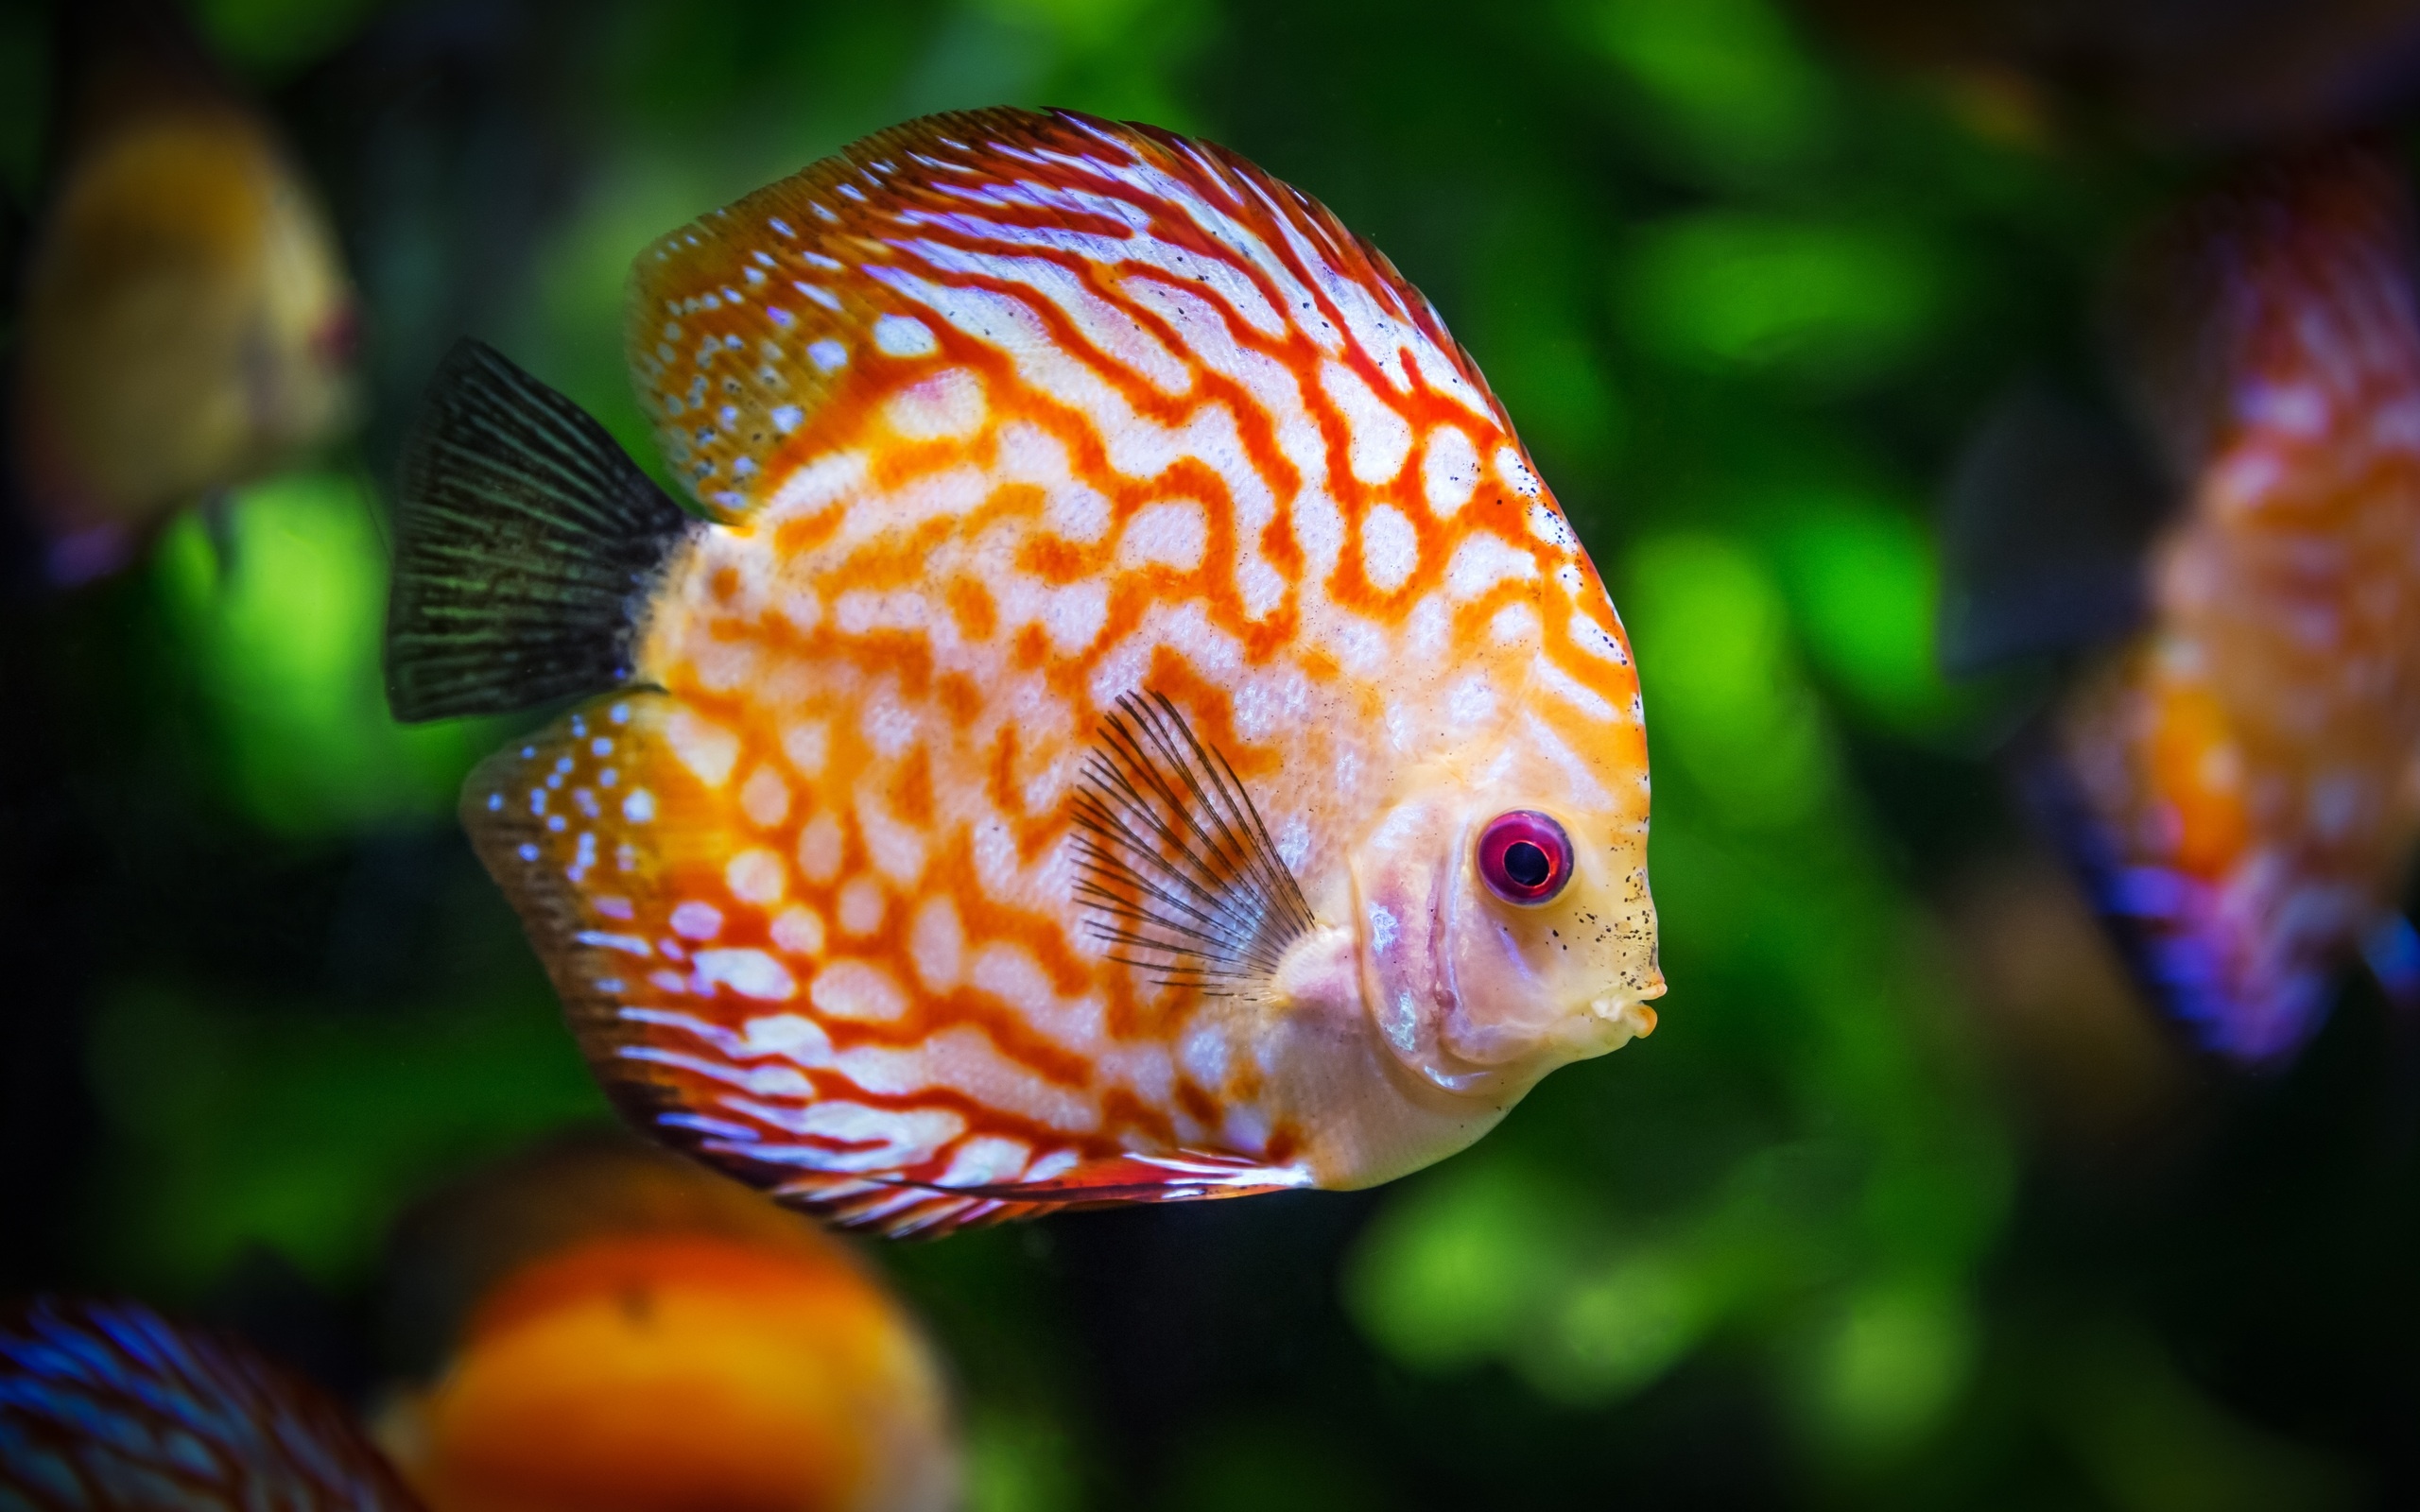 Discus fish 5K wallpapers, High-resolution images, Exquisite and vibrant, Captivating underwater beauty, 2560x1600 HD Desktop